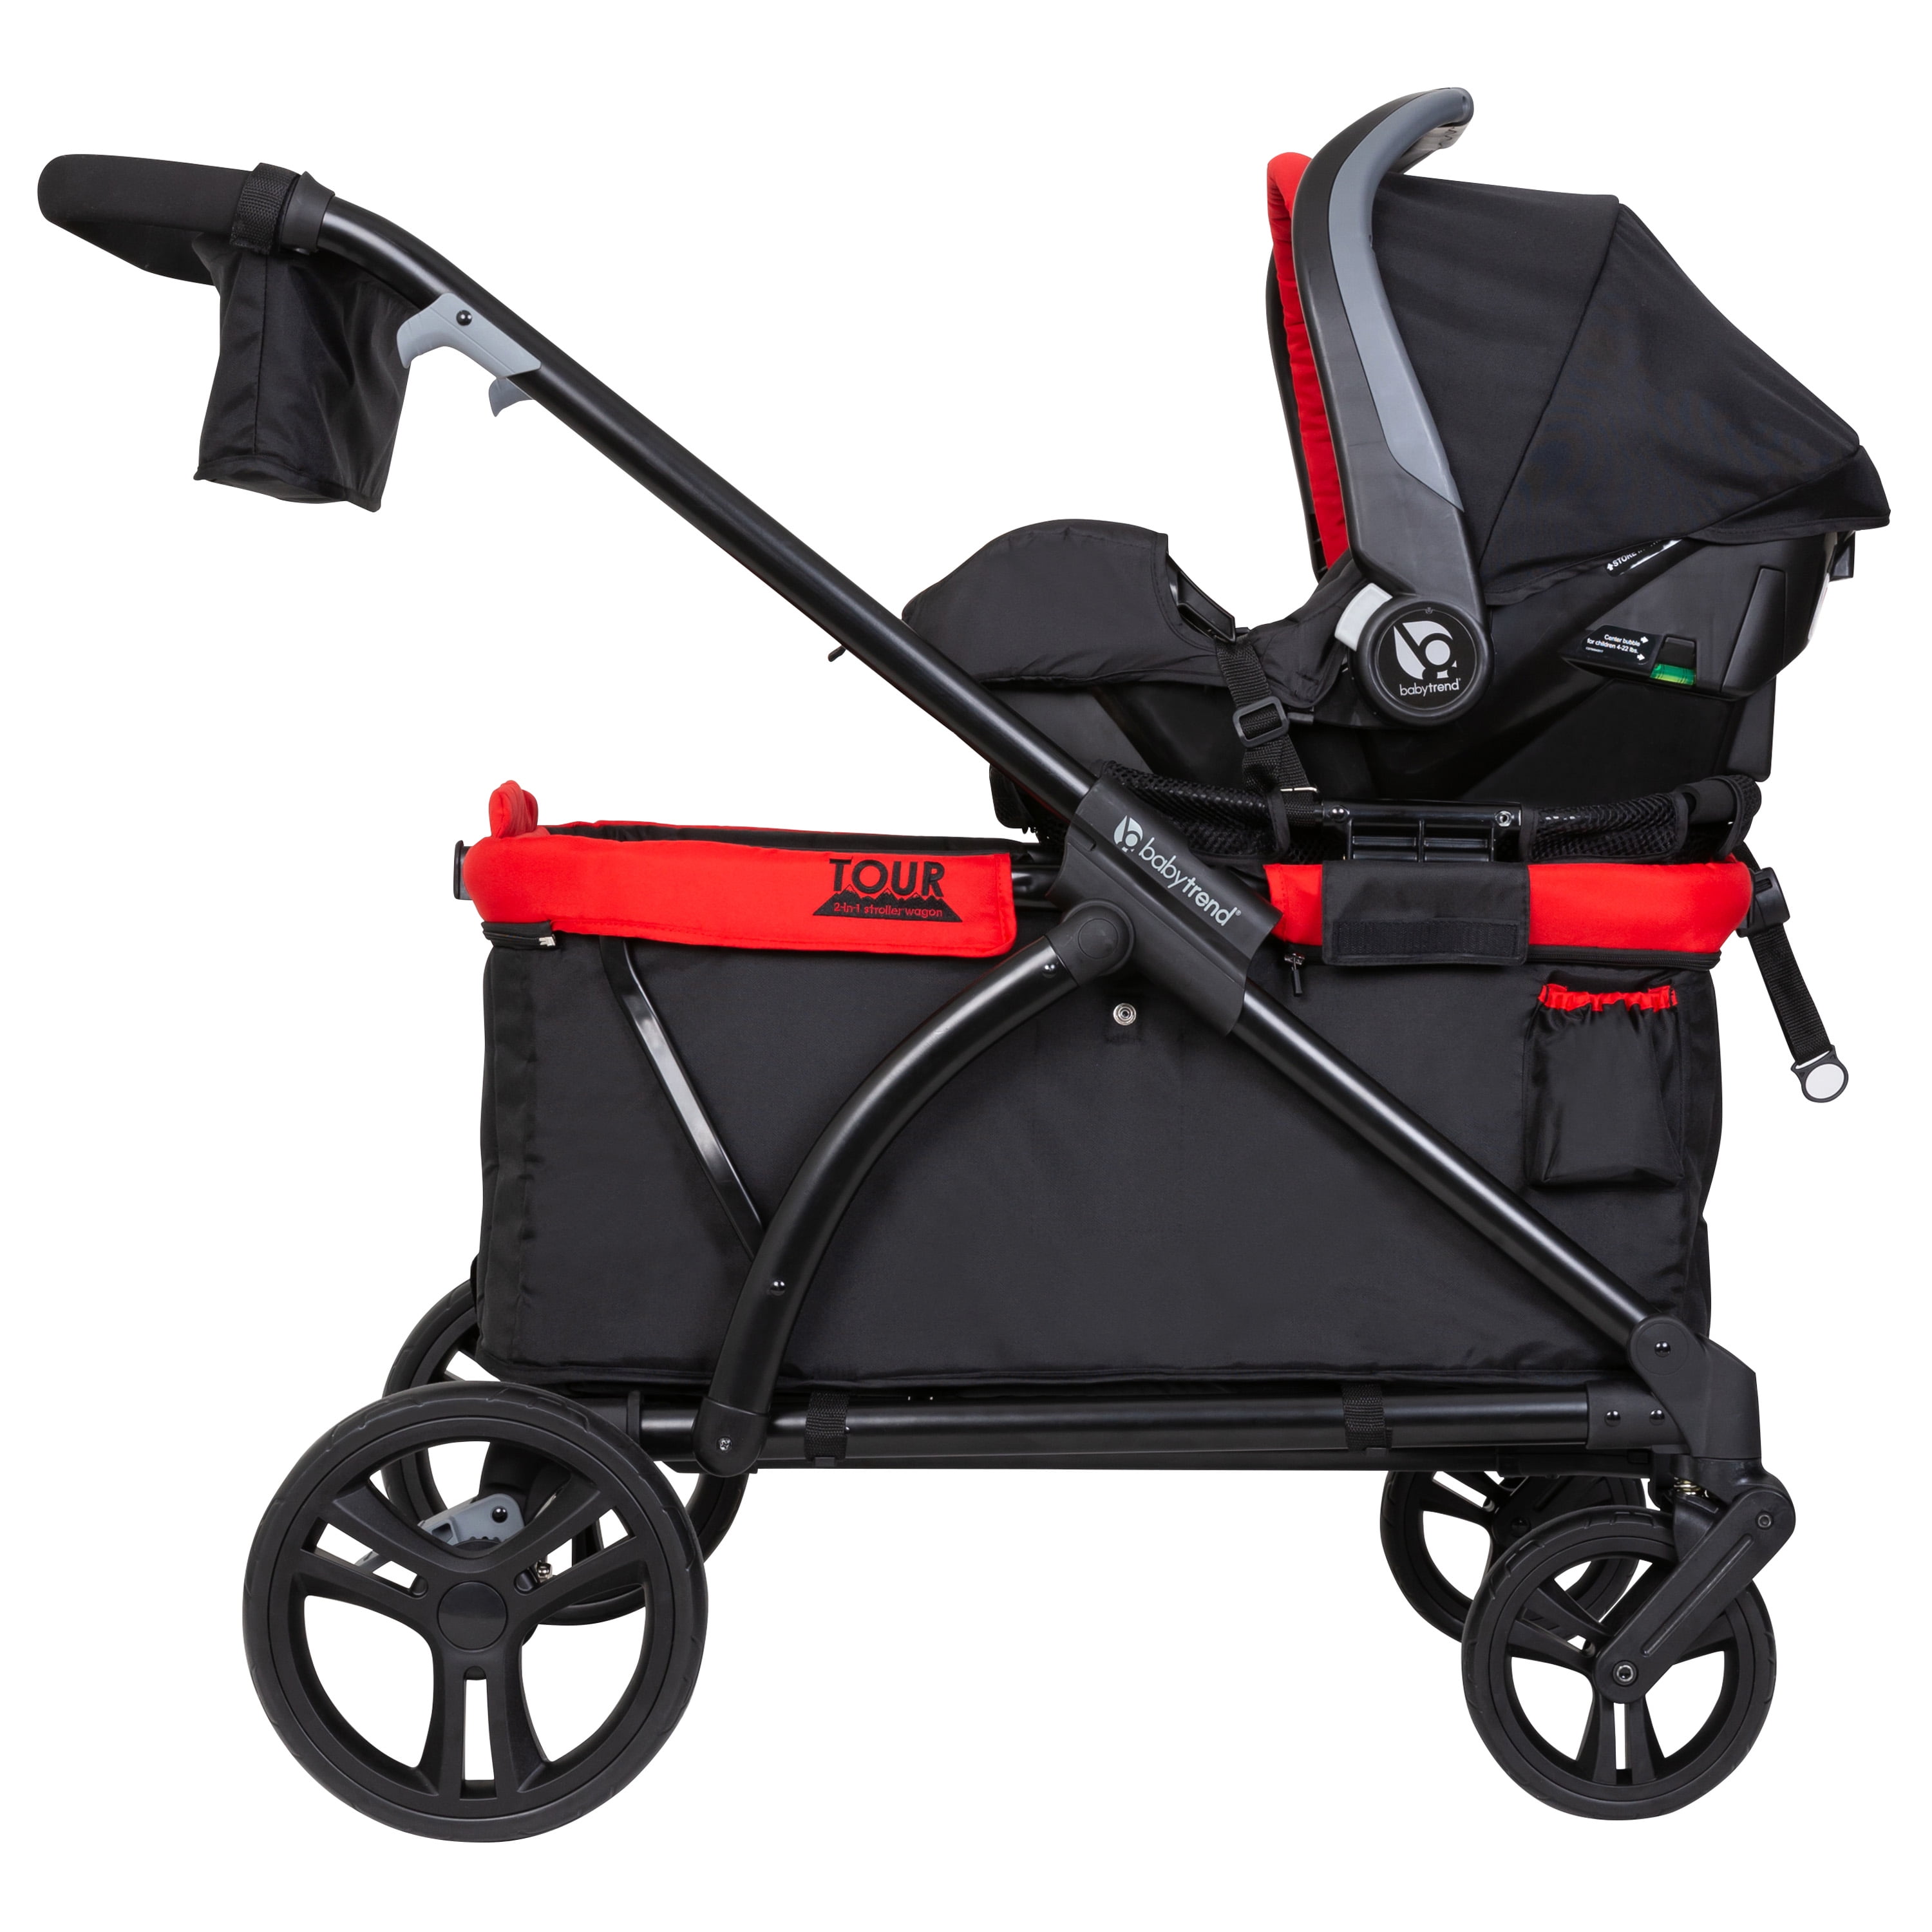 baby trend stroller compatible with graco car seat